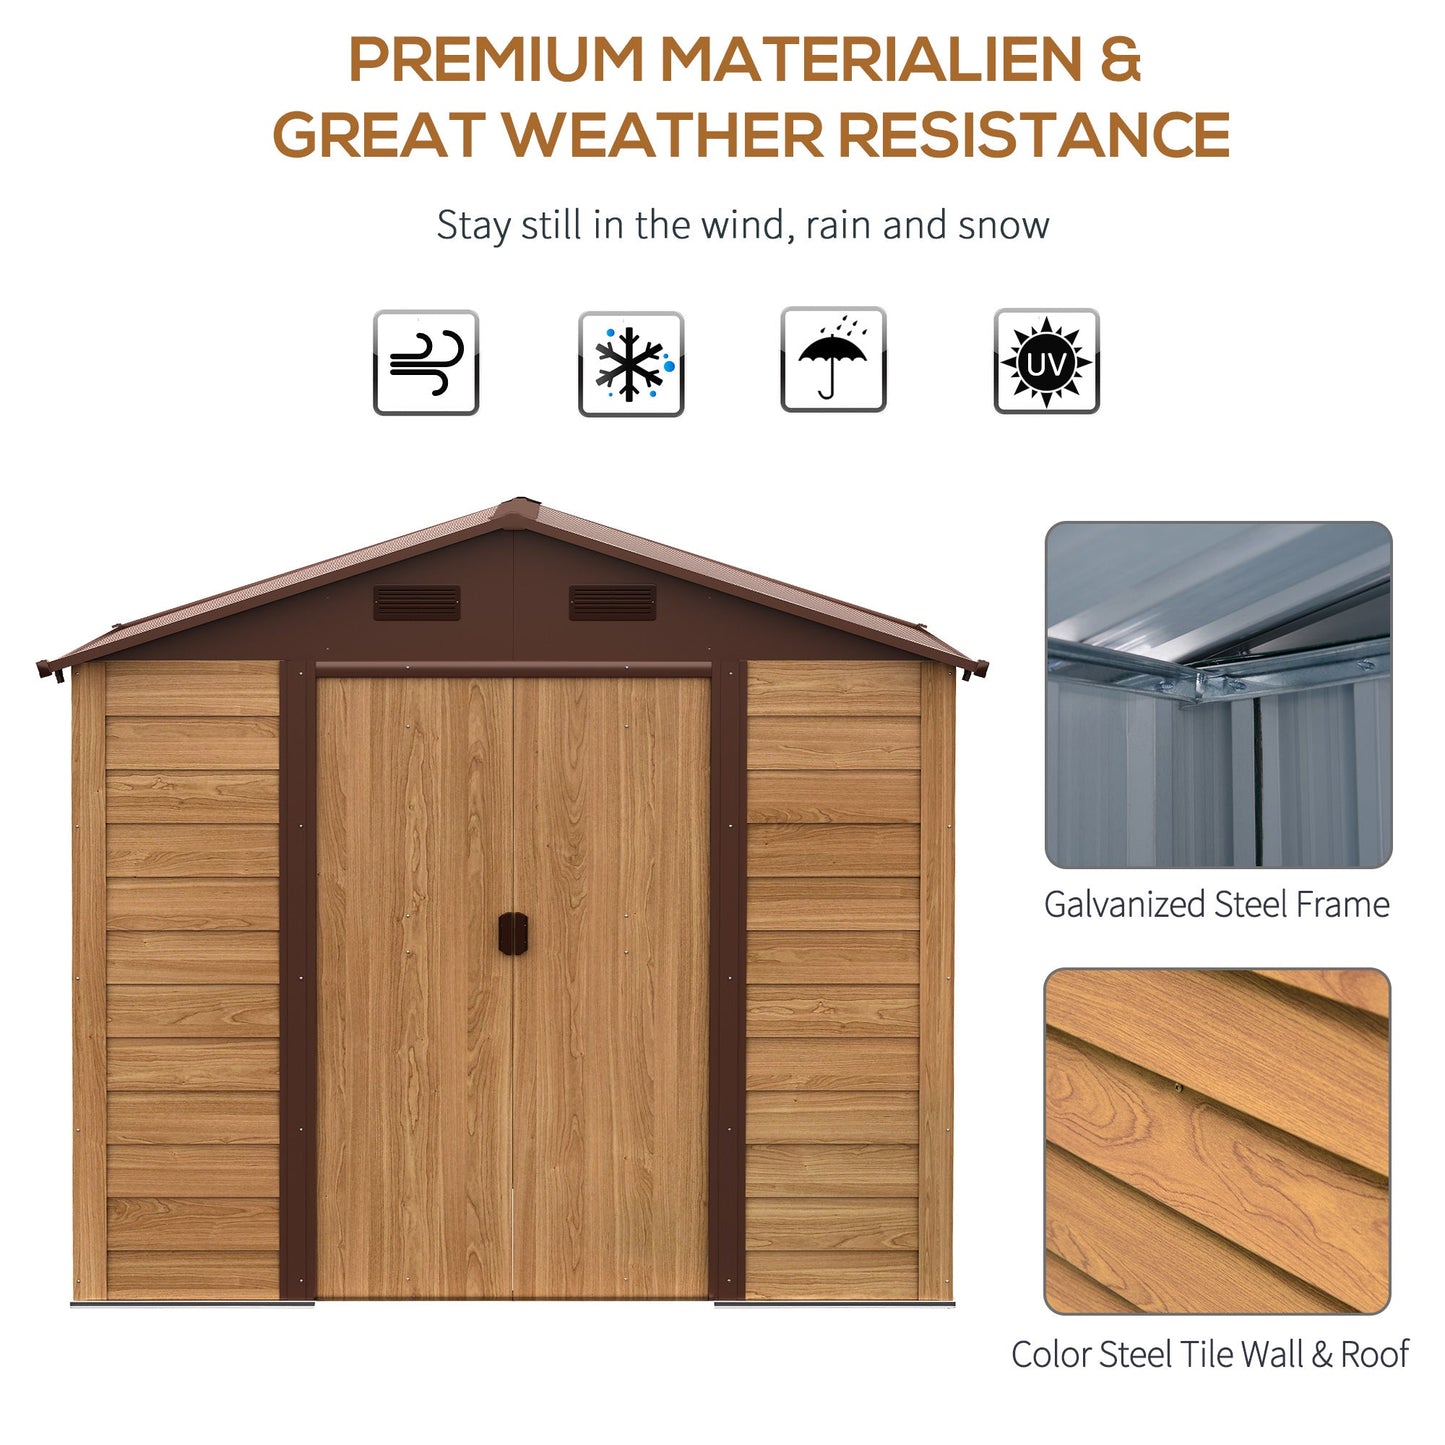 Outdoor and Garden-7.7' x 6.4' Metal Outdoor Storage Shed with 2 Doors and 4 Ventilation for Patio, Backyard & Lawn, Outdoor Furniture, Brown - Outdoor Style Company